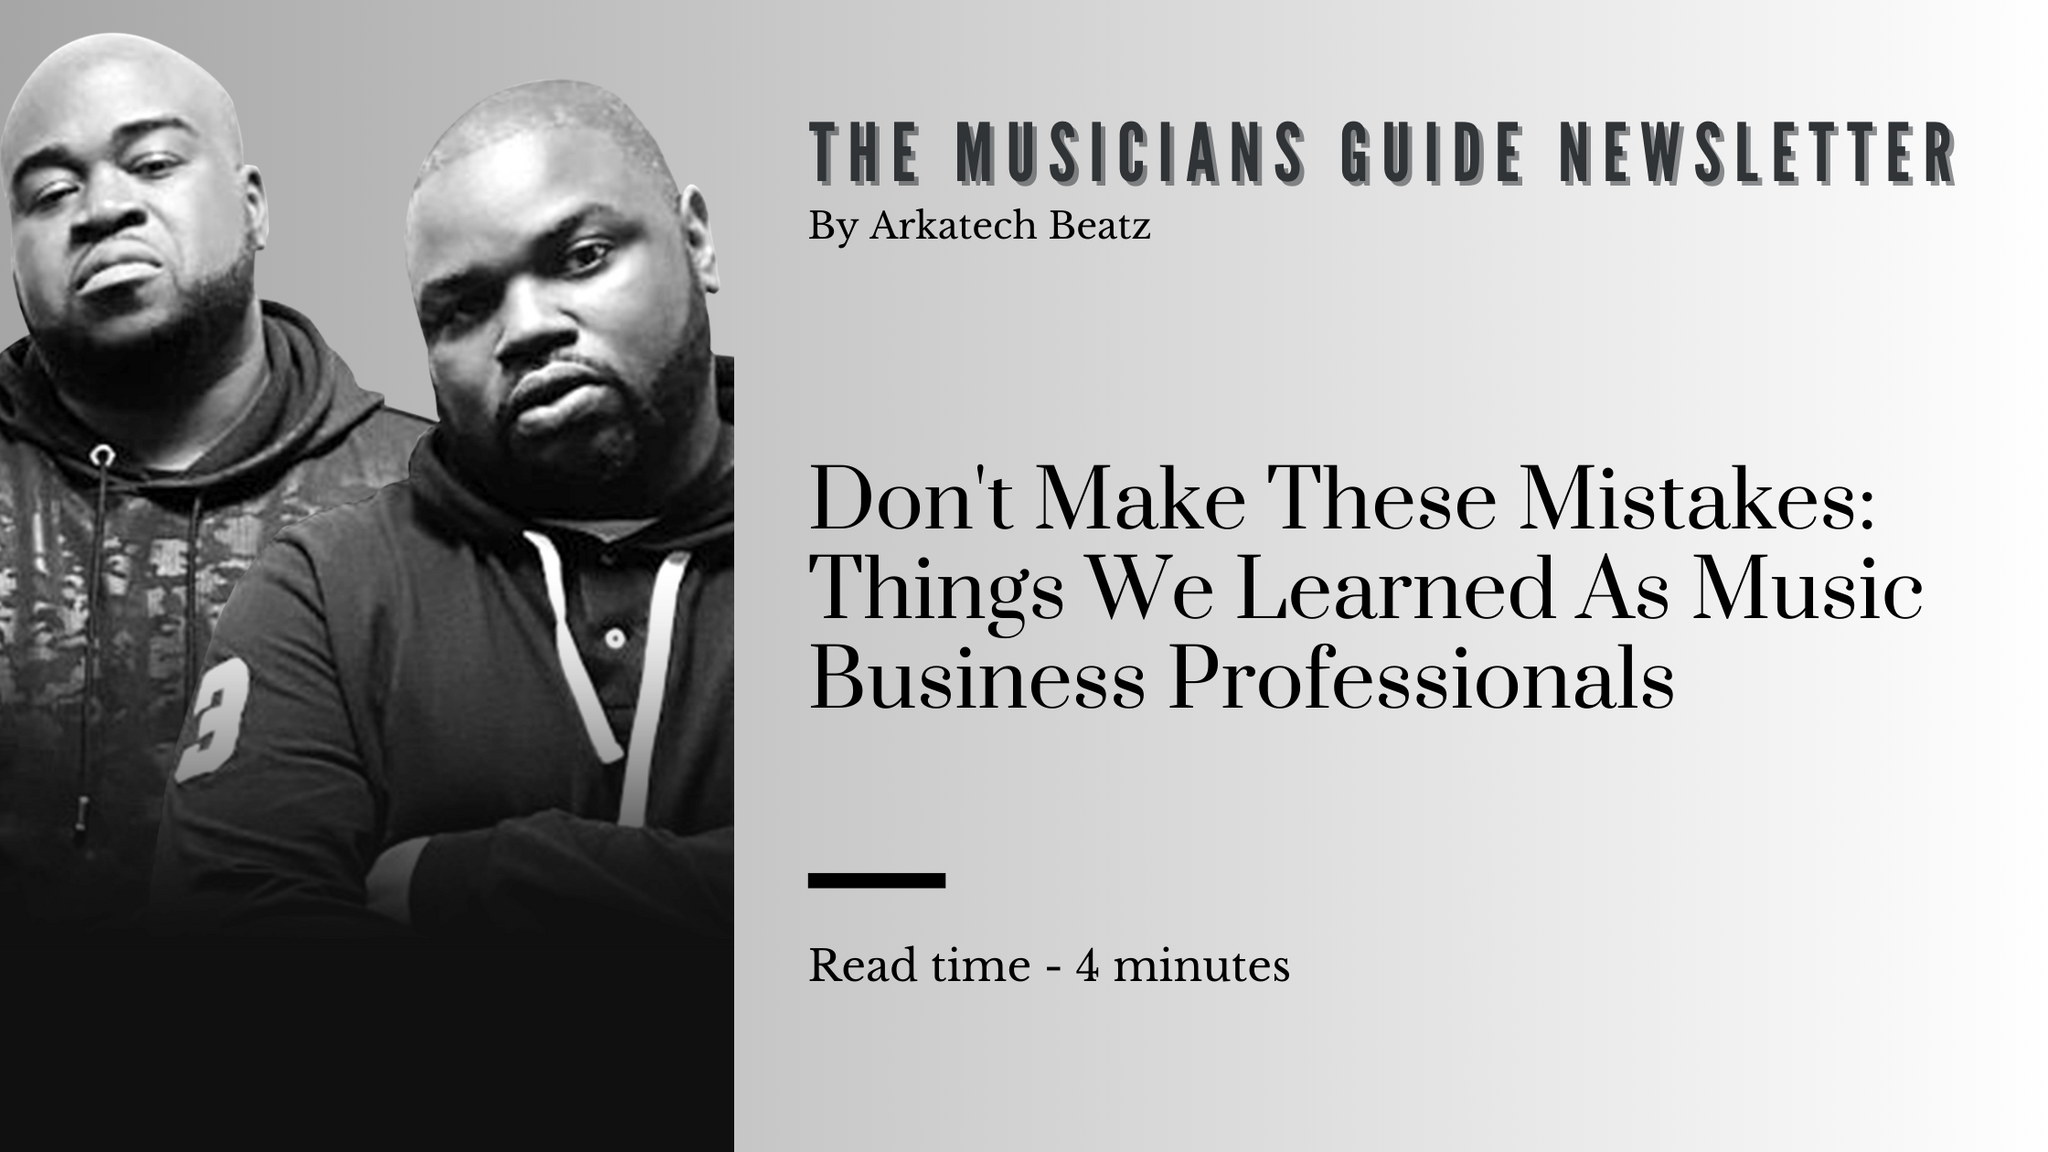 Don't Make These Mistakes: Things We Learned As Music Business Professionals